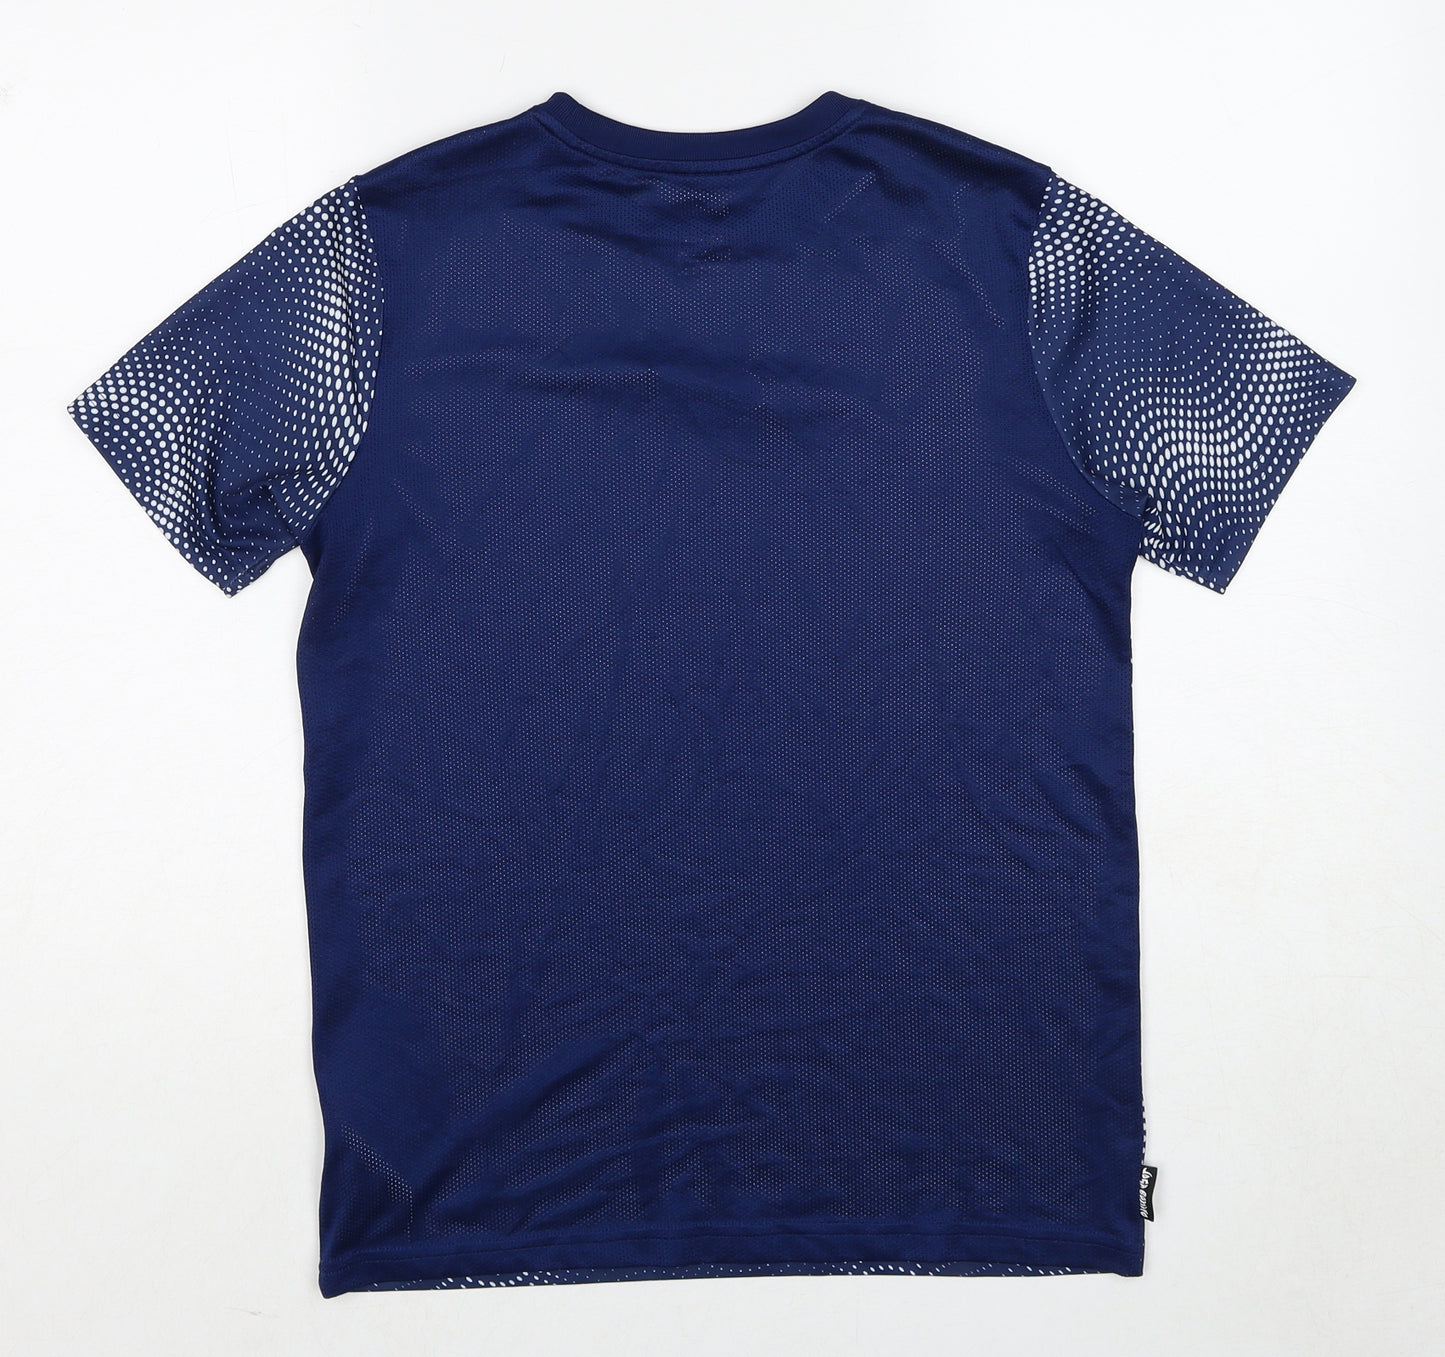 Nike Boys Blue Geometric Polyester Basic T-Shirt Size 13-14 Years Round Neck Pullover